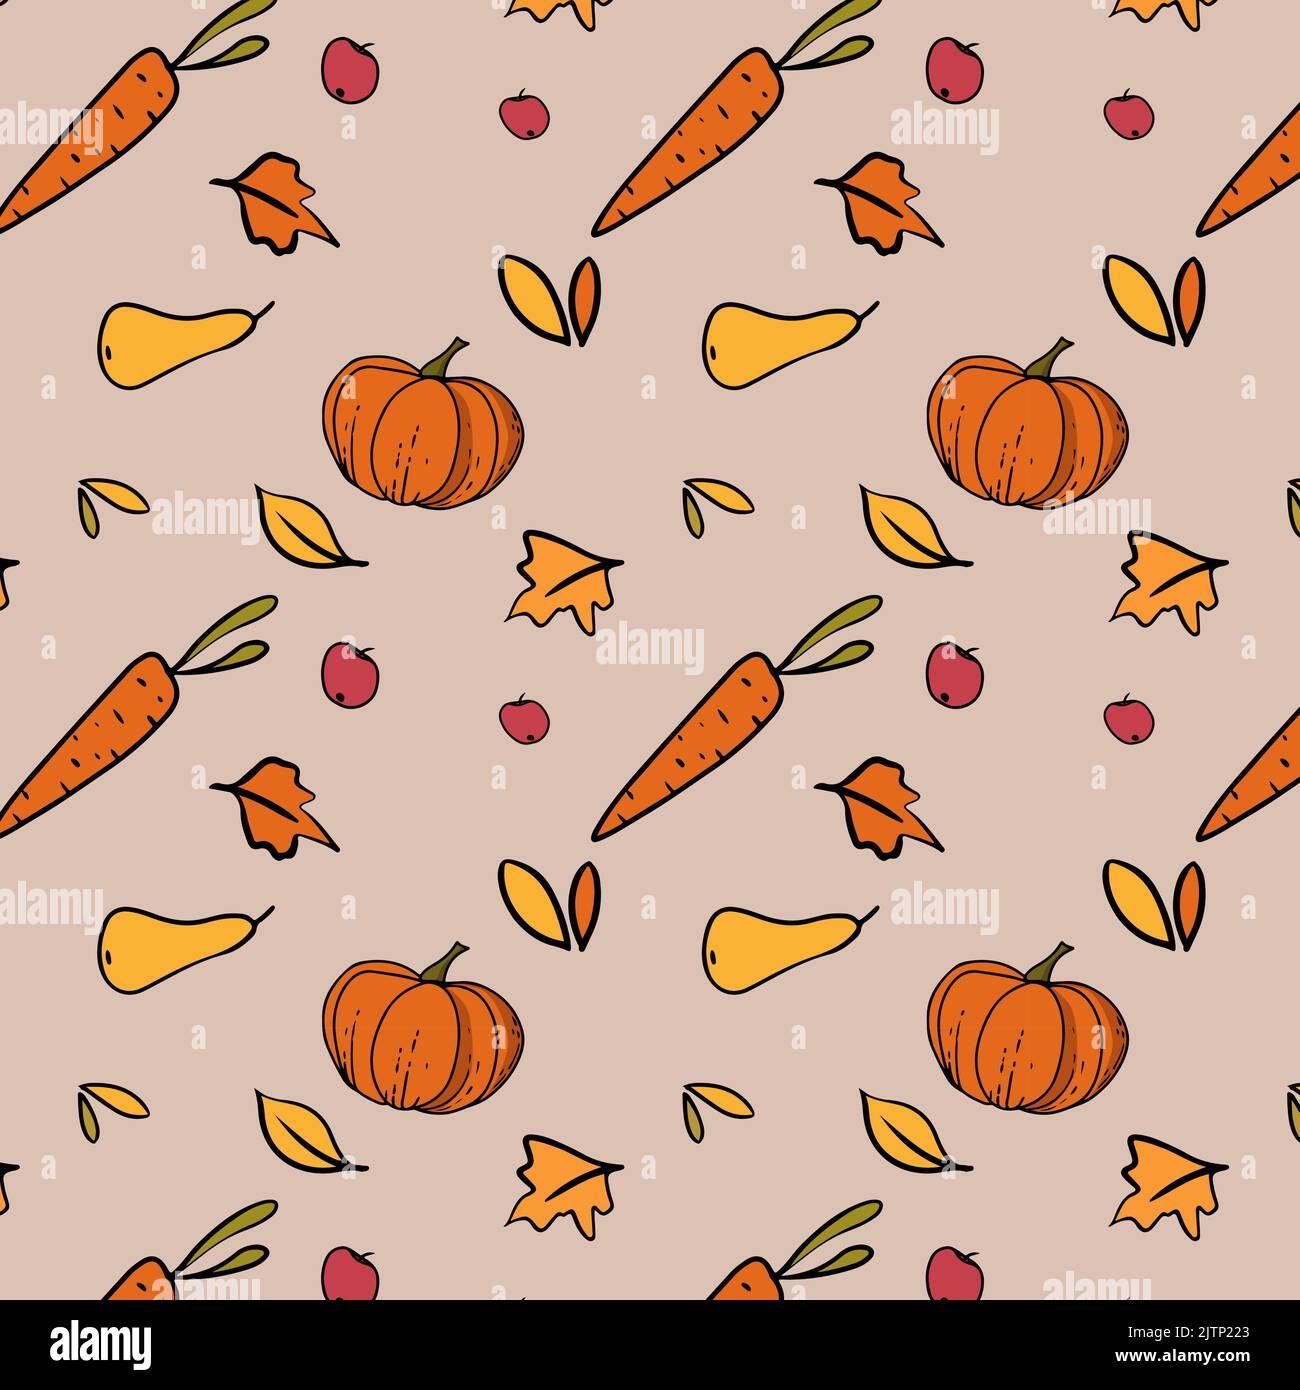 autumn pattern pumpkin carrot leaves pear and apples Stock Vector